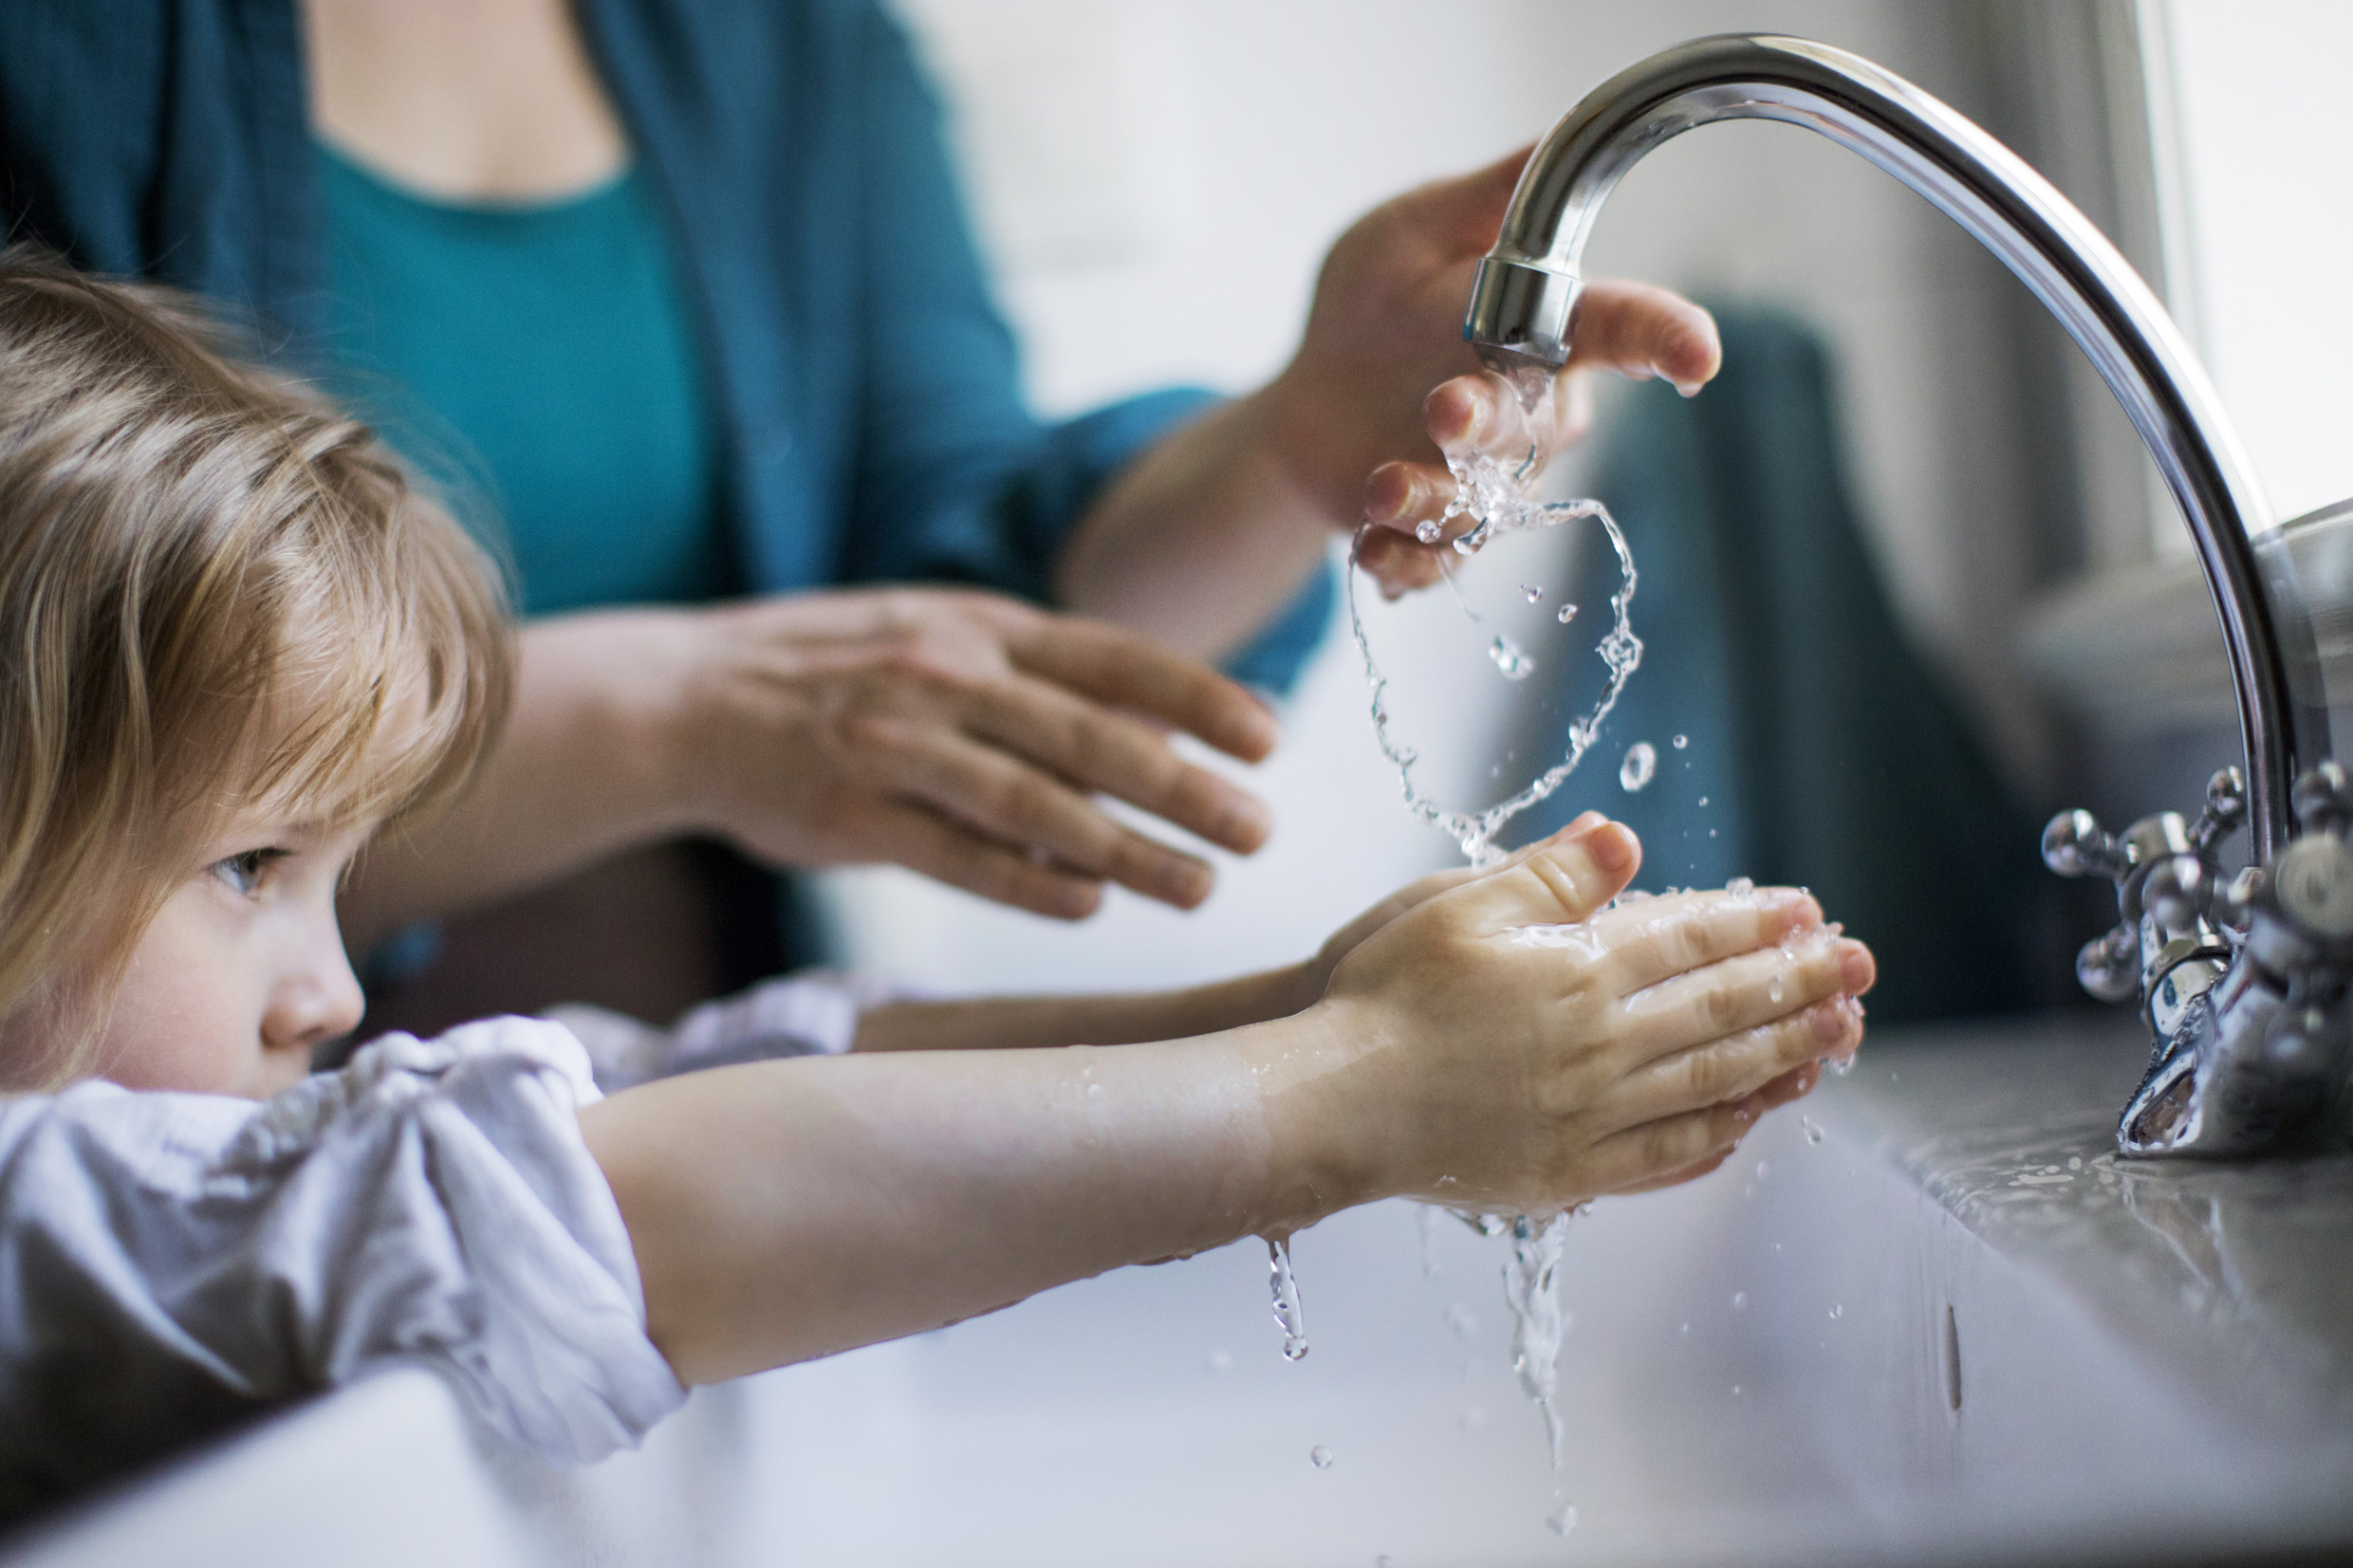 Child washing hands in tap water